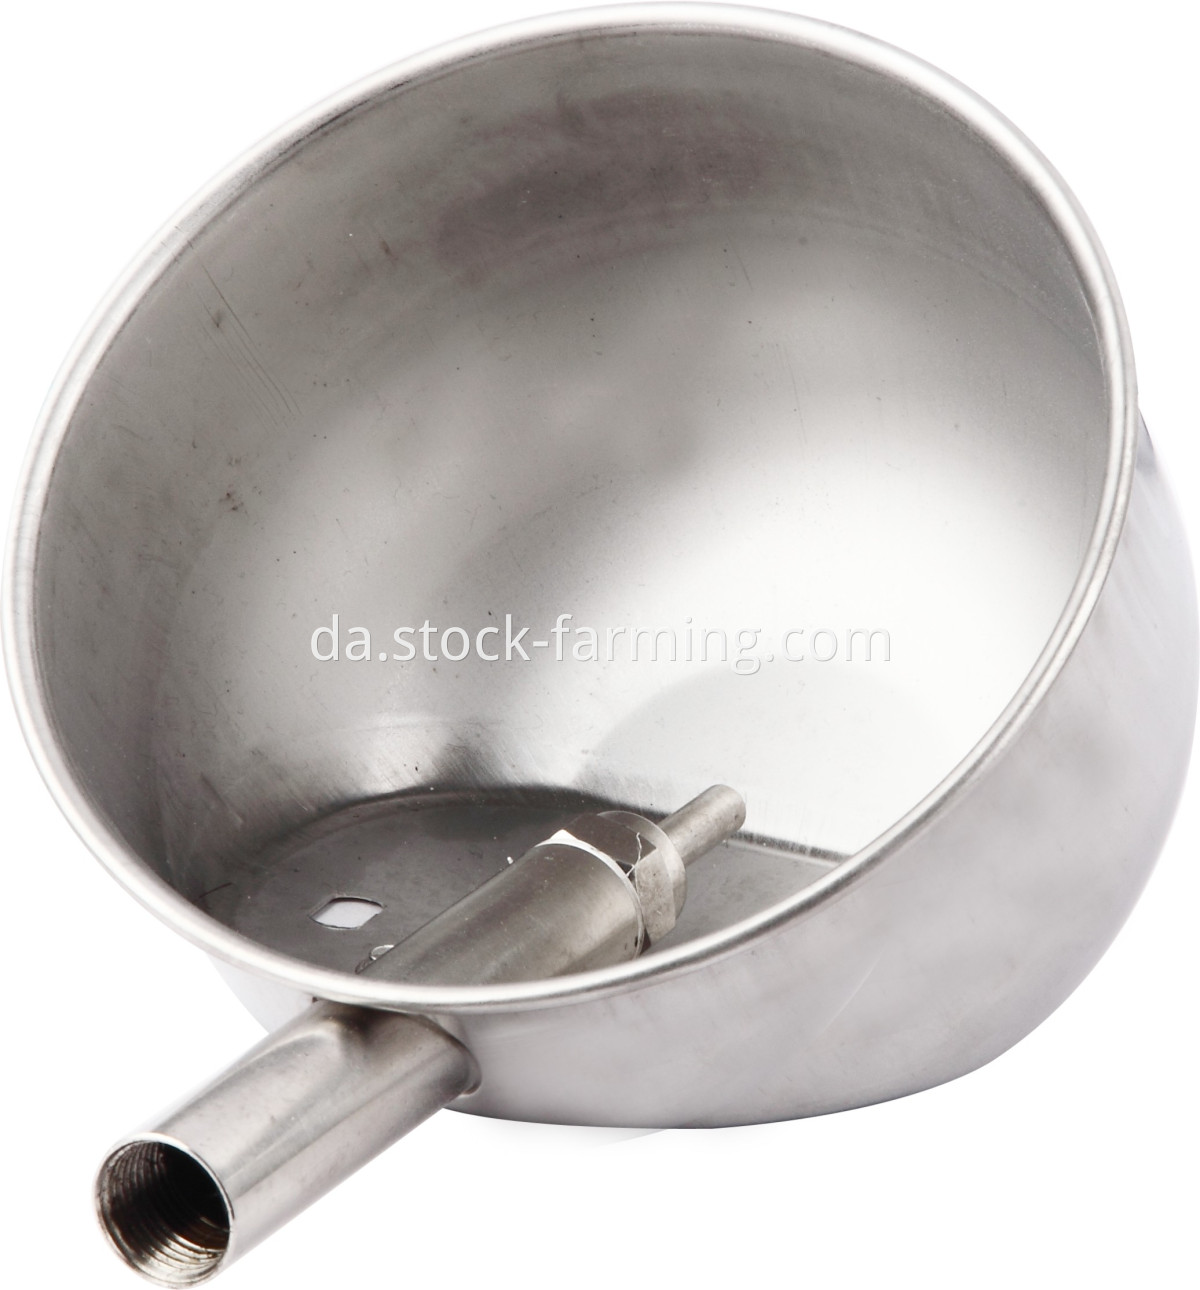 Stainless Steel Pig drinking bowl